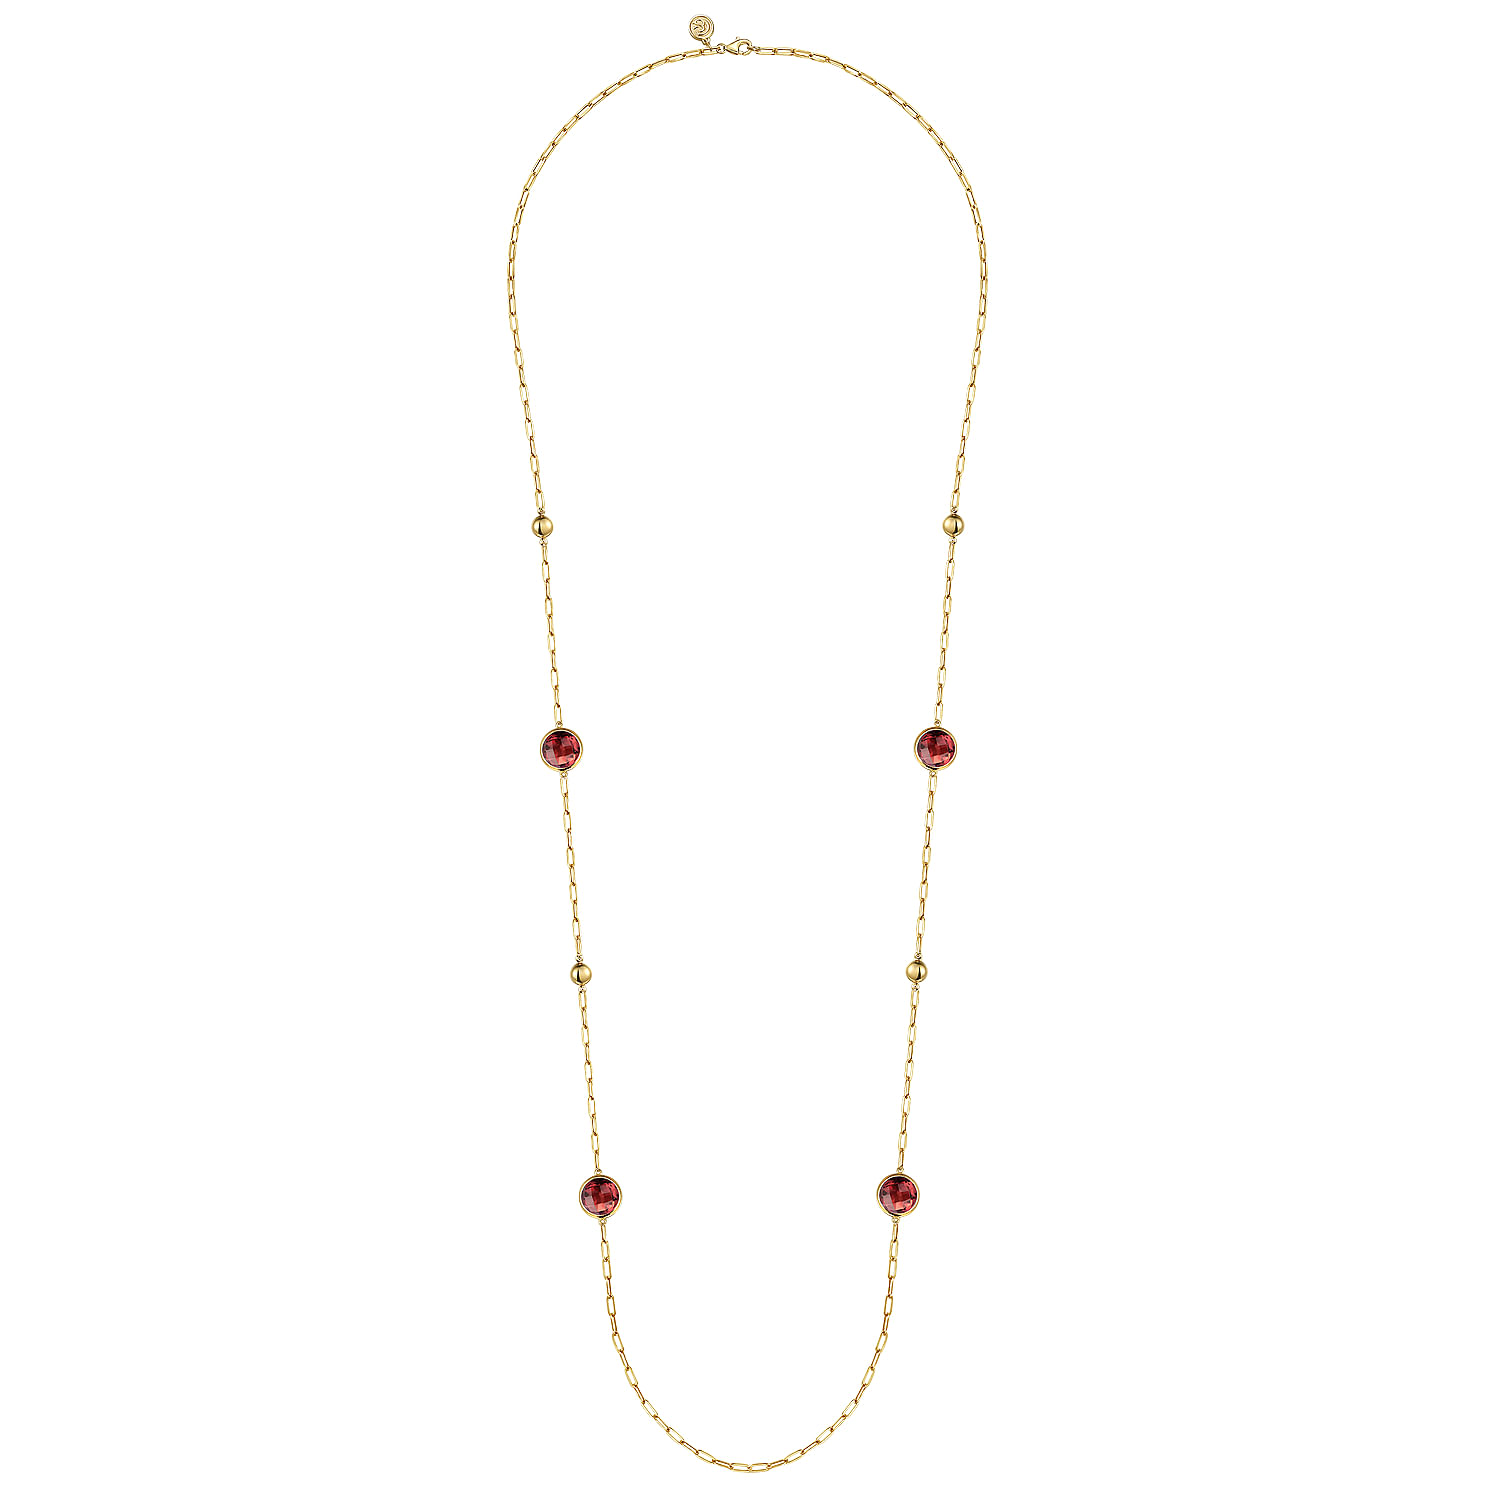 14K Yellow Gold Garnet Round Shape Necklace With Four Stations ,Beads and Bezel Setting